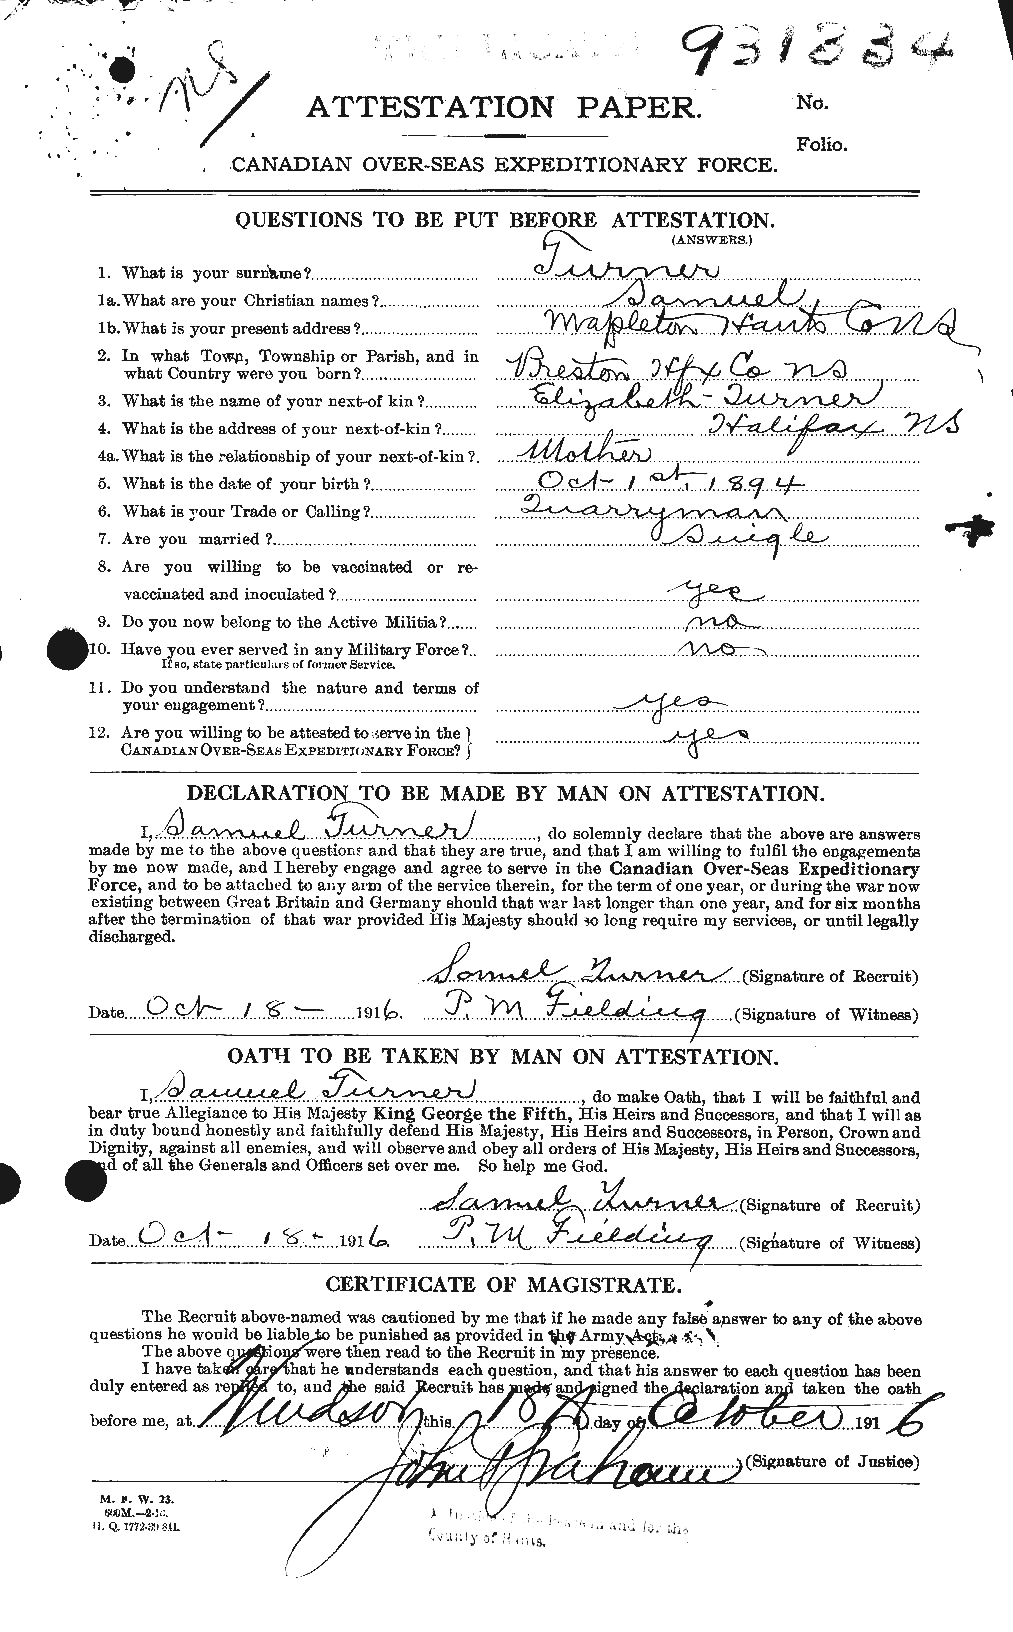 Personnel Records of the First World War - CEF 643857a